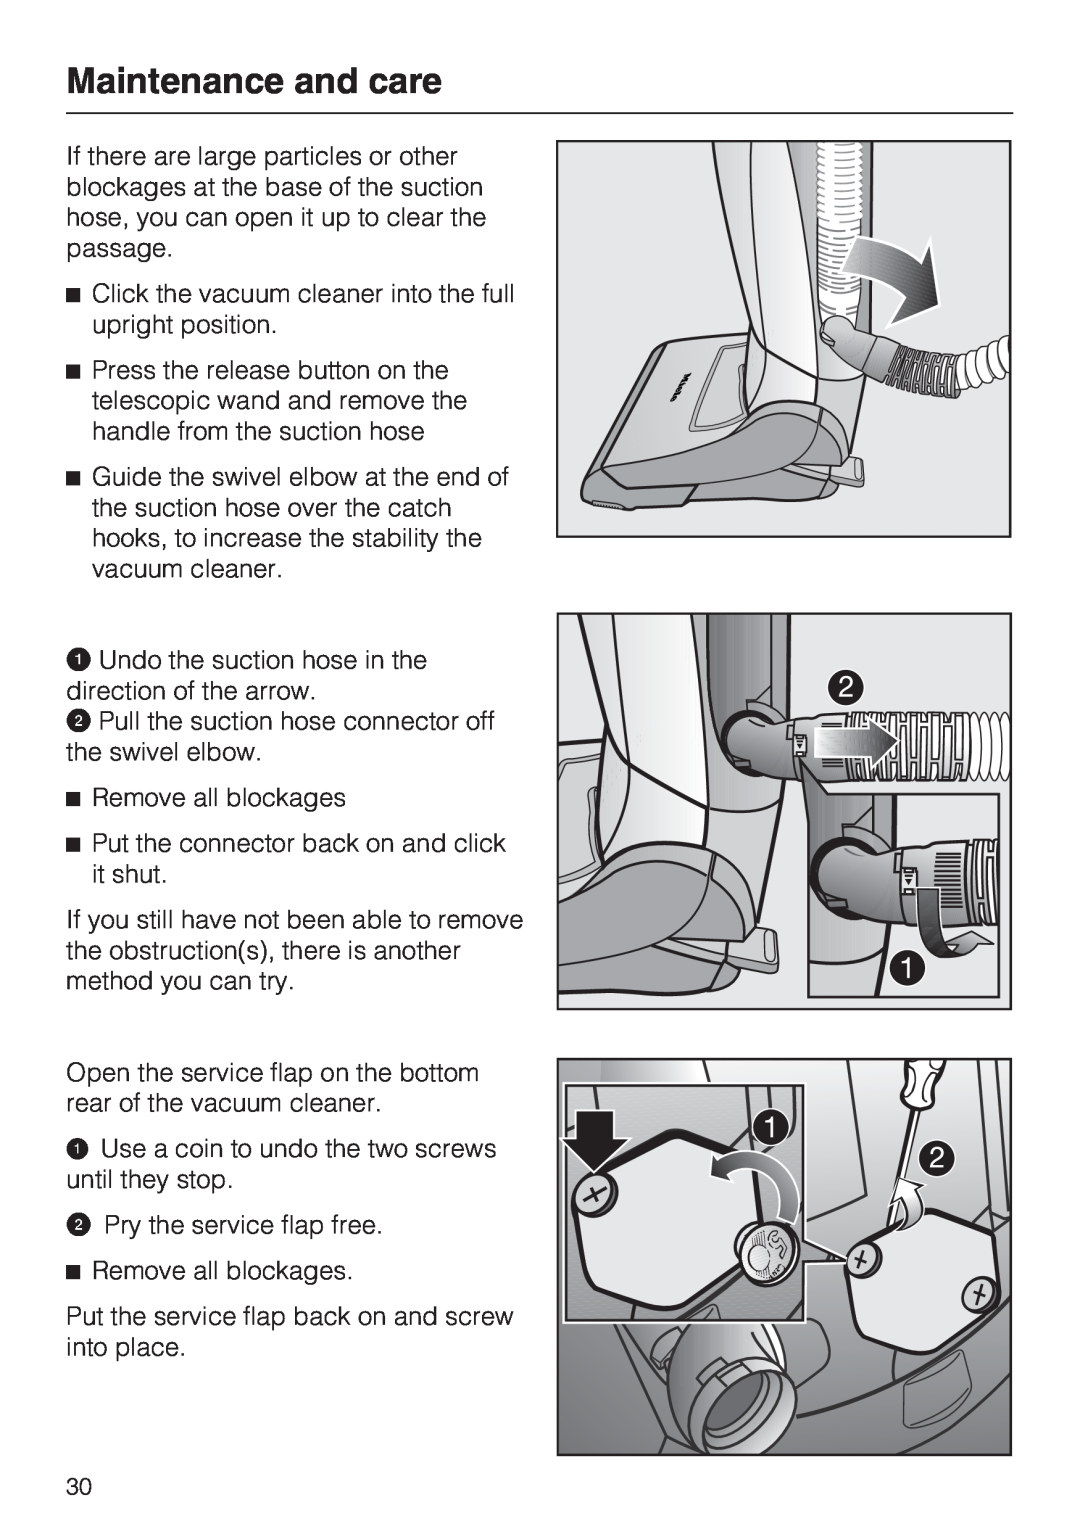 Miele S 7000 operating instructions Maintenance and care, Remove all blockages 